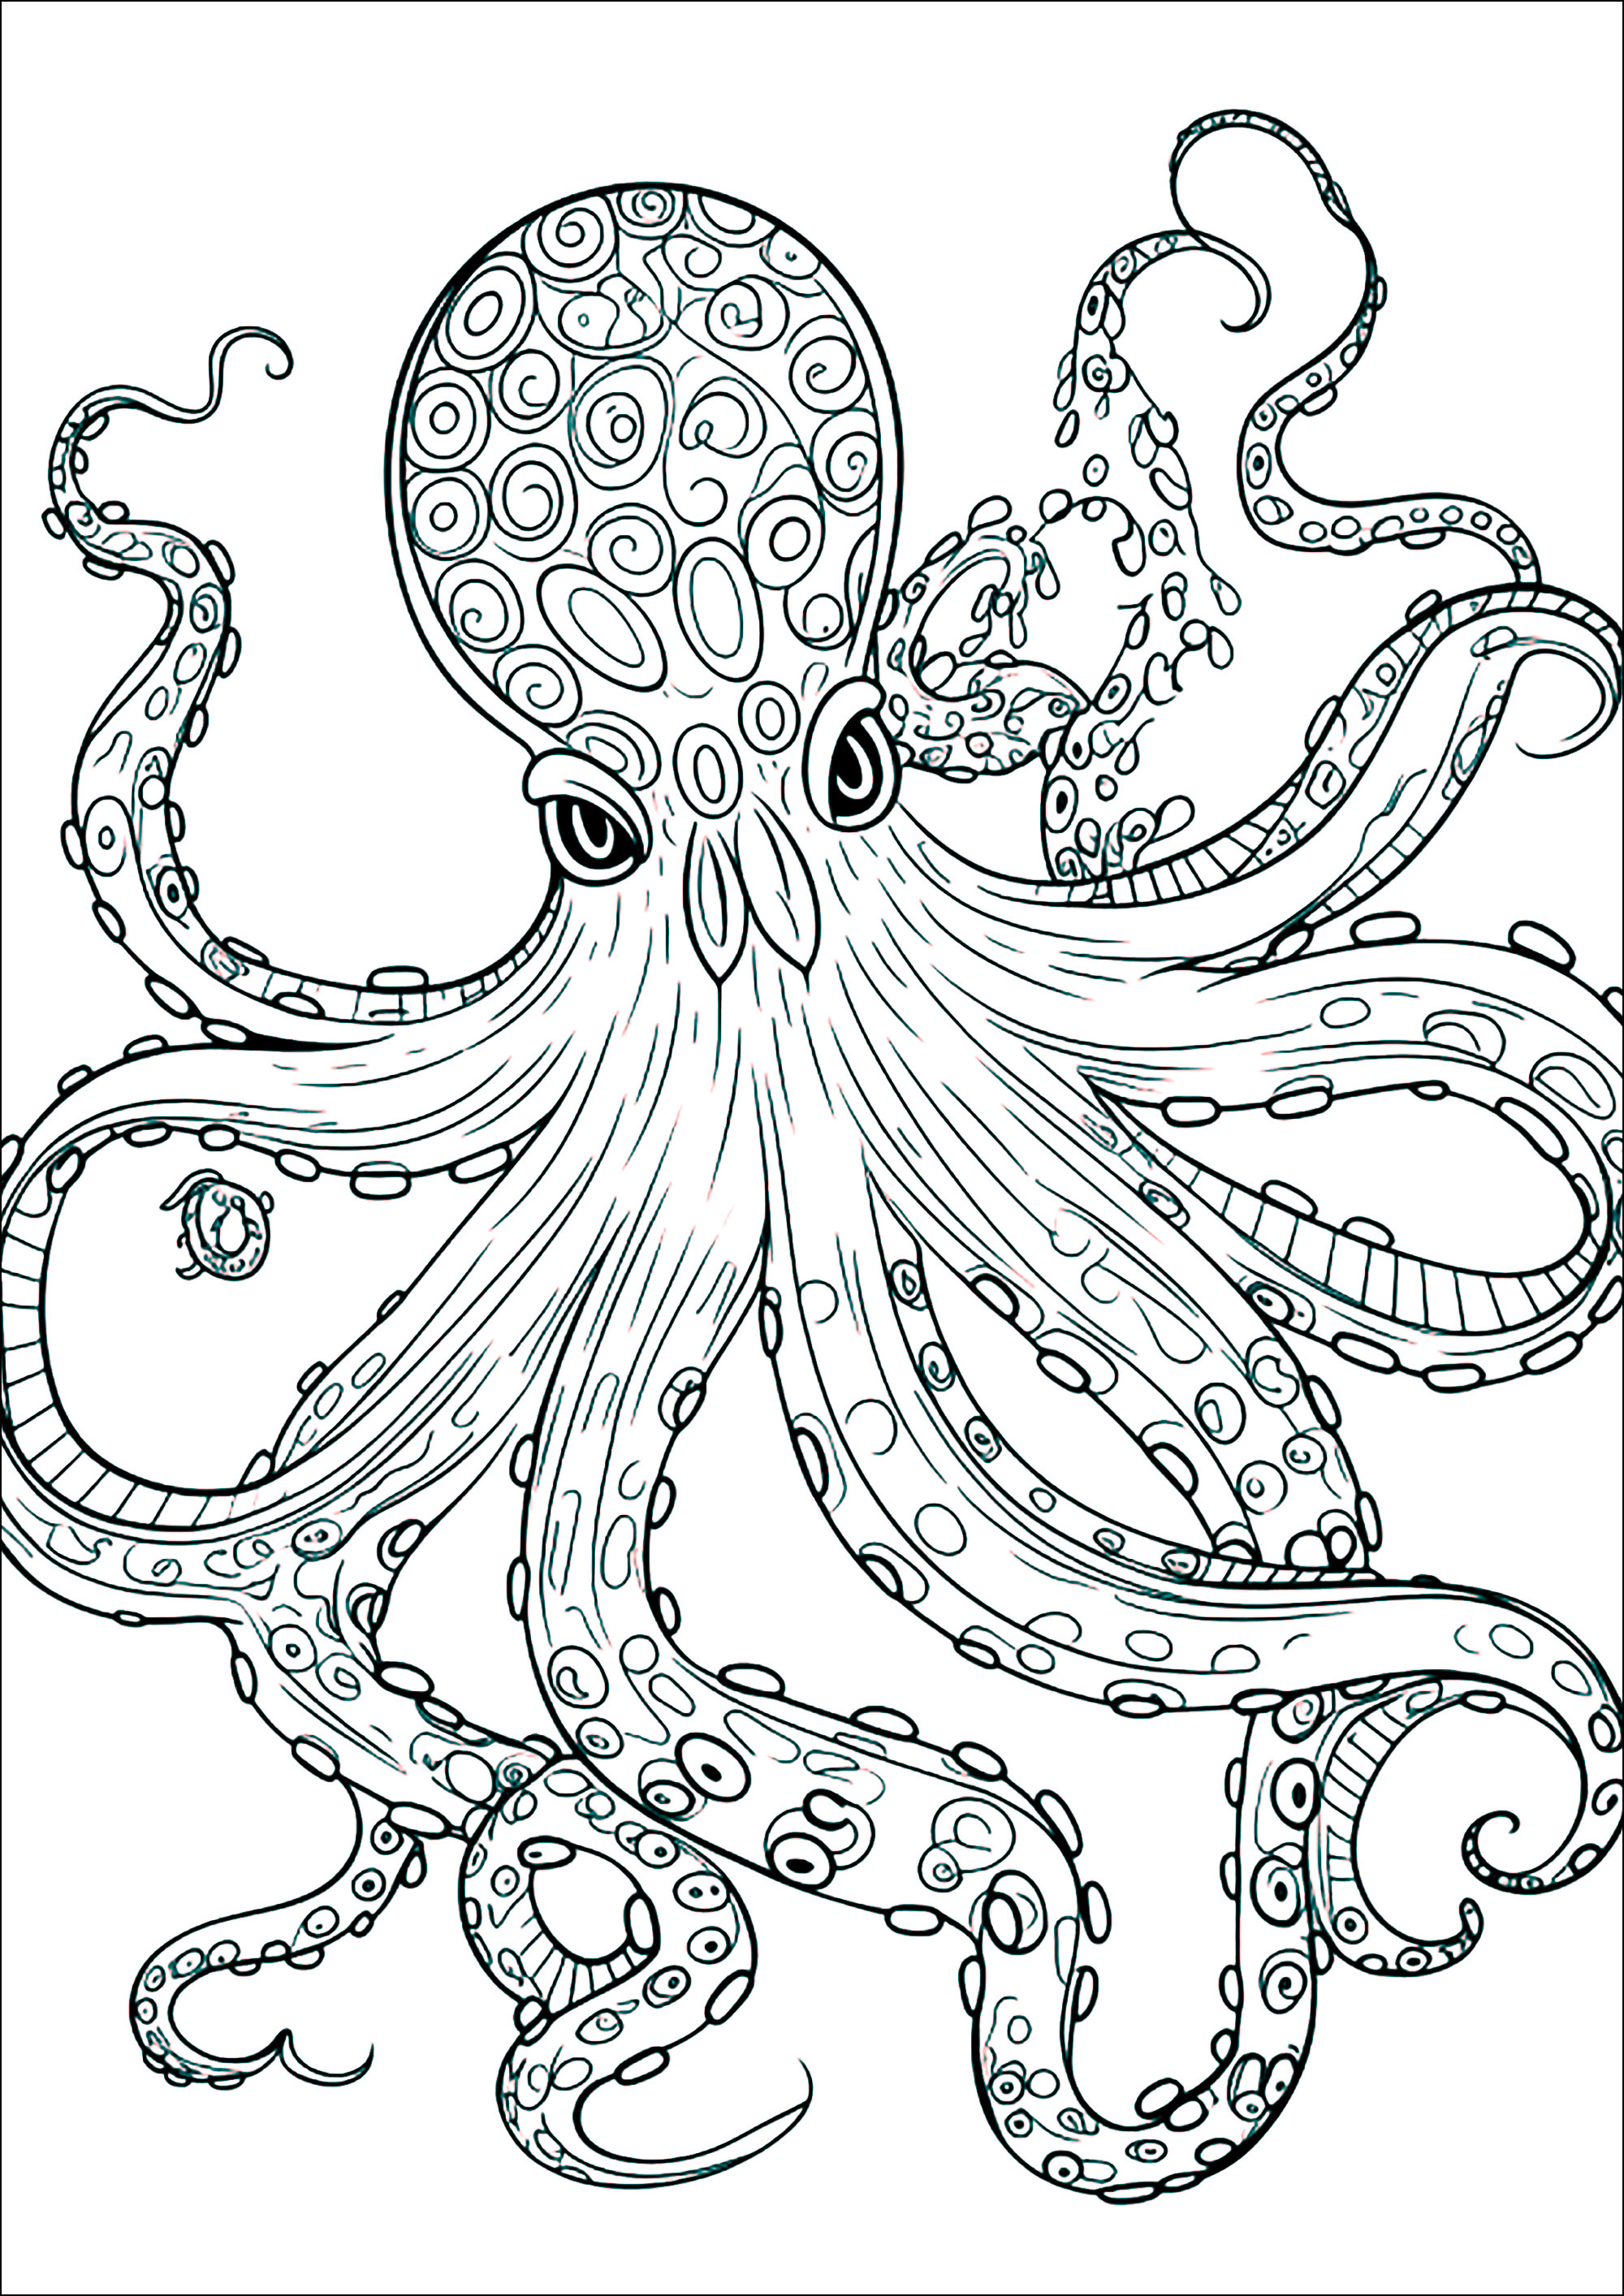 Giant Octopus to print and color